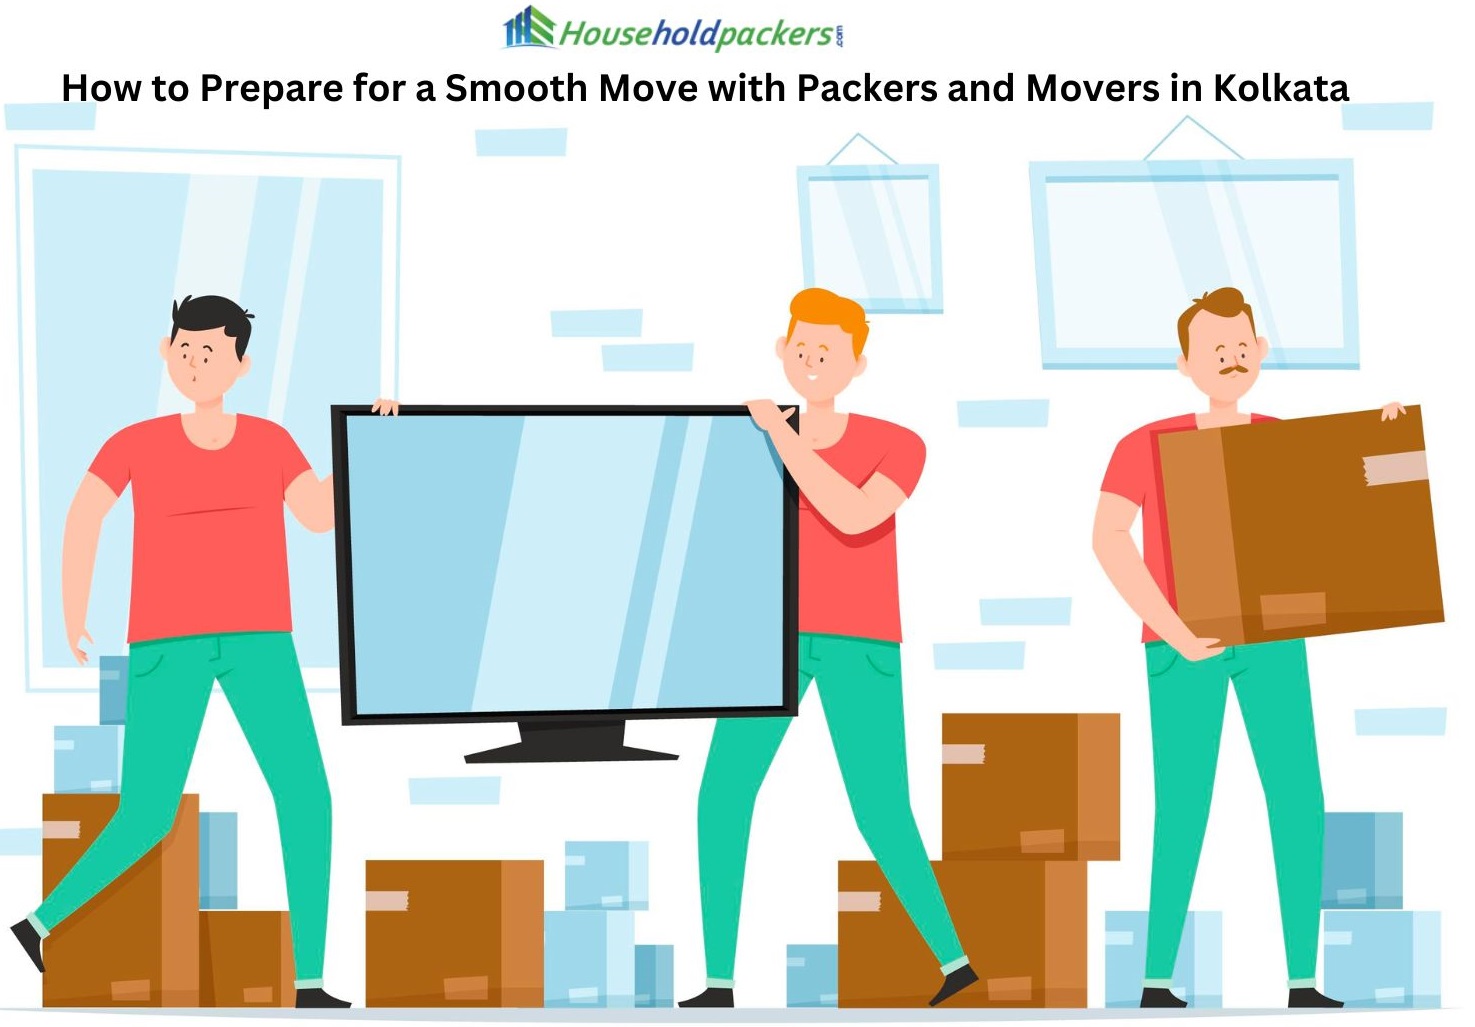 How to Prepare for a Smooth Move with Packers and Movers in Kolkata